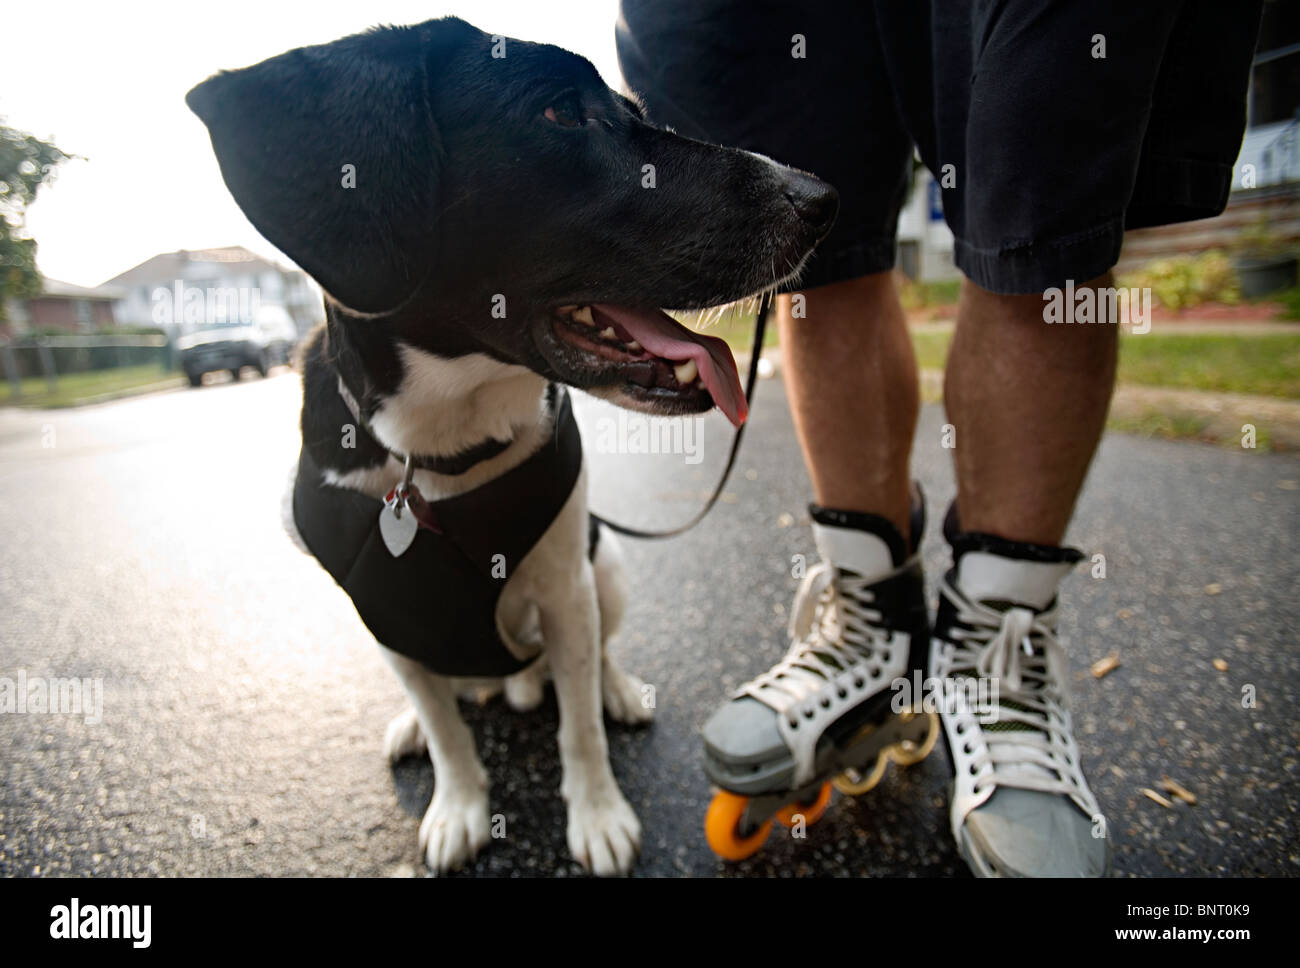 Tired looking dog standing beside man with roller skates Stock Photo - Alamy